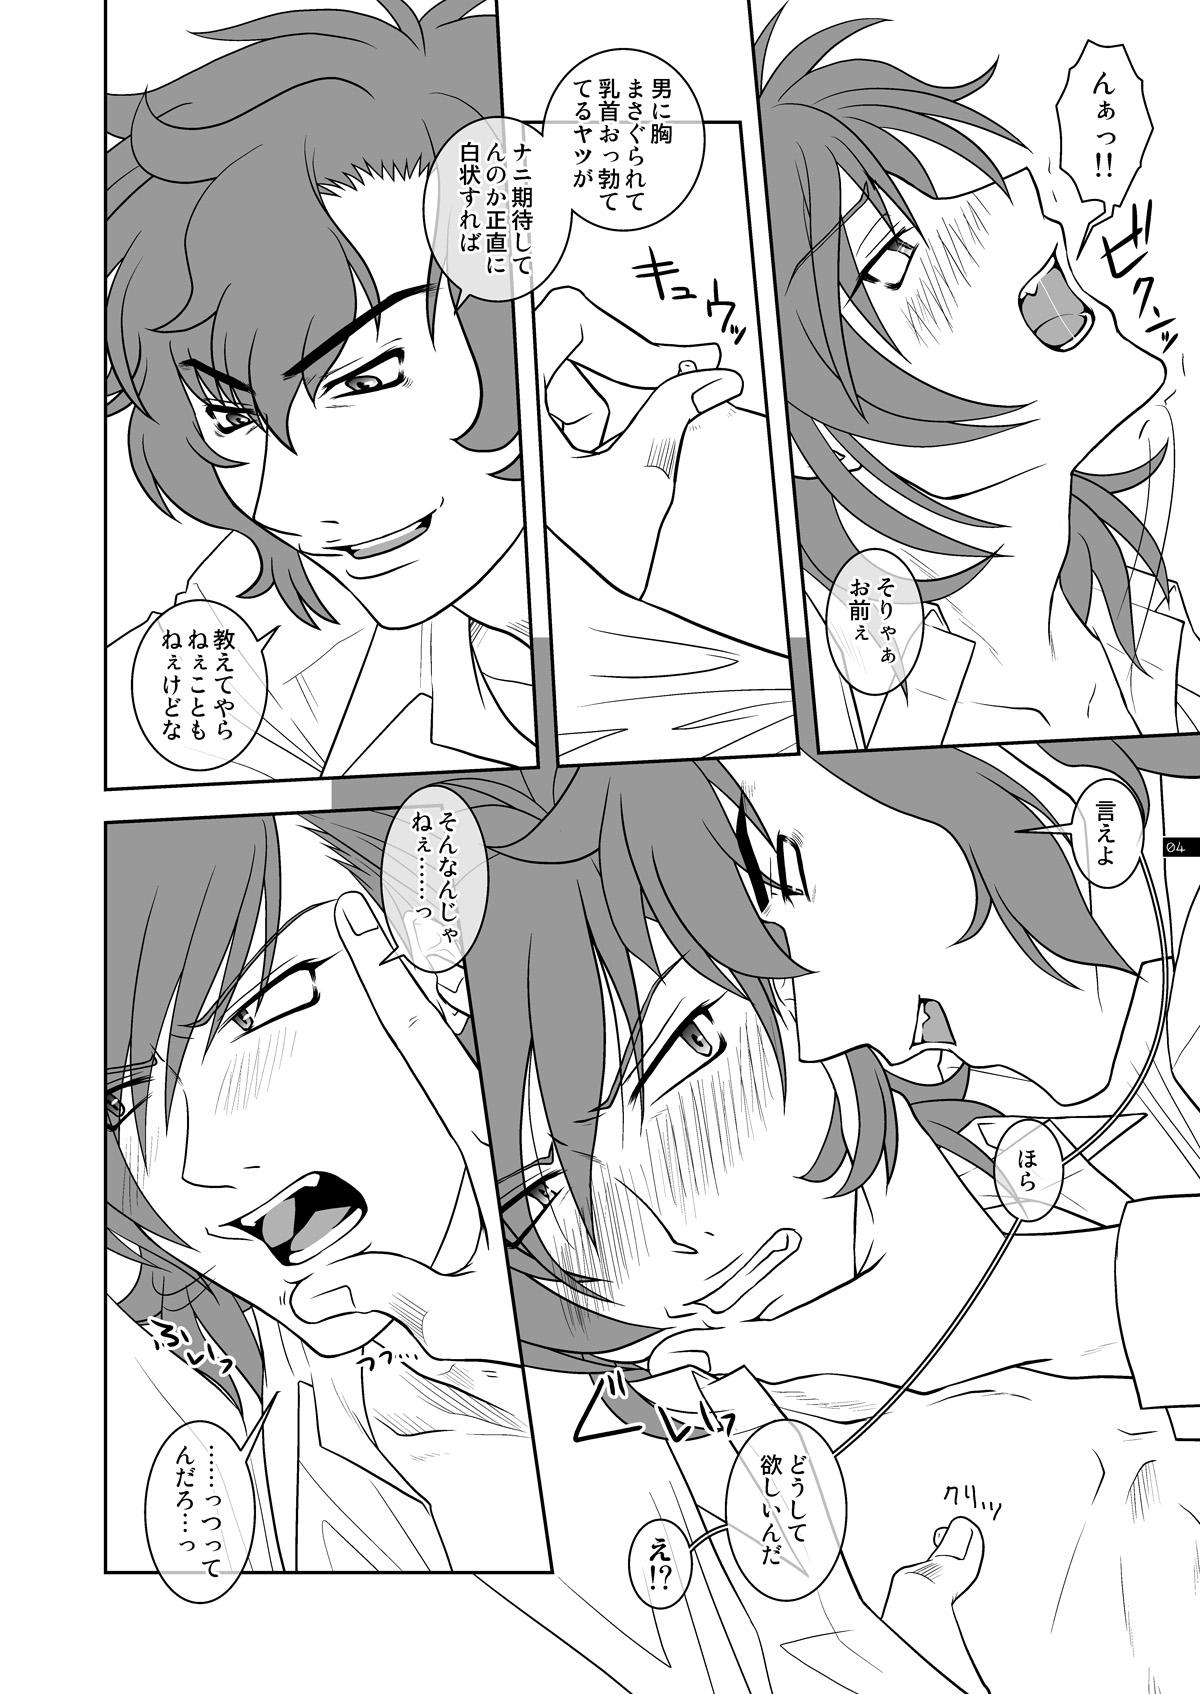 Interracial SWEET - Gundam 00 Eating Pussy - Page 3